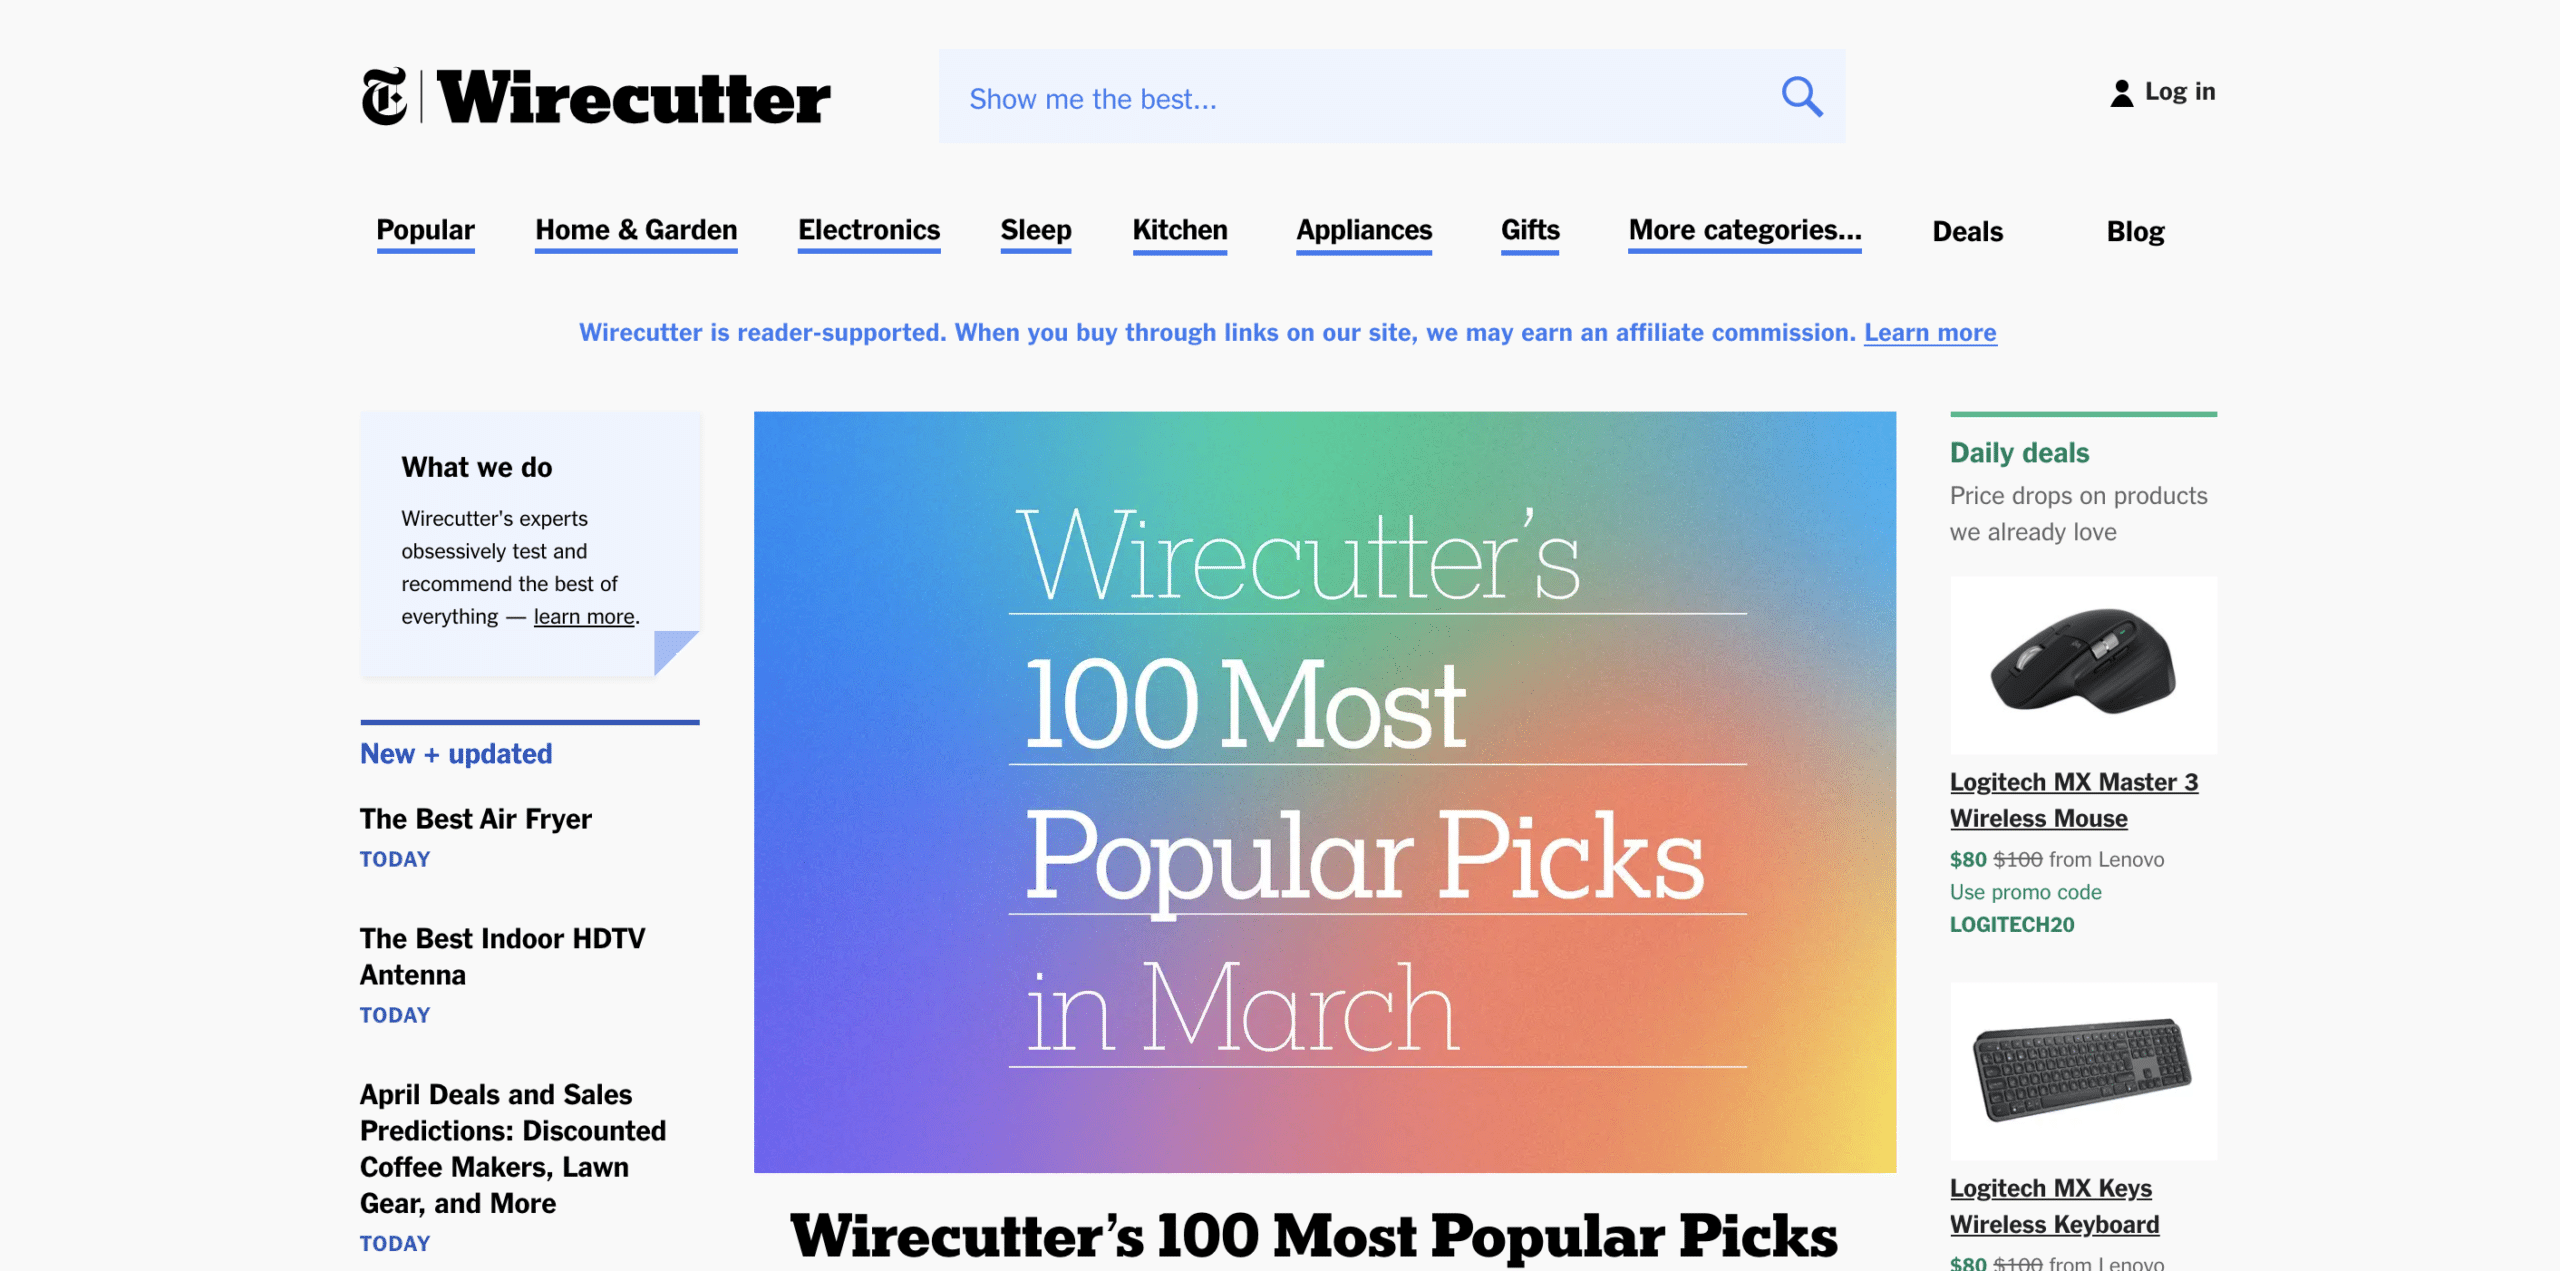 wirecutter is on of the affiliate marketing examples and this is the homepage